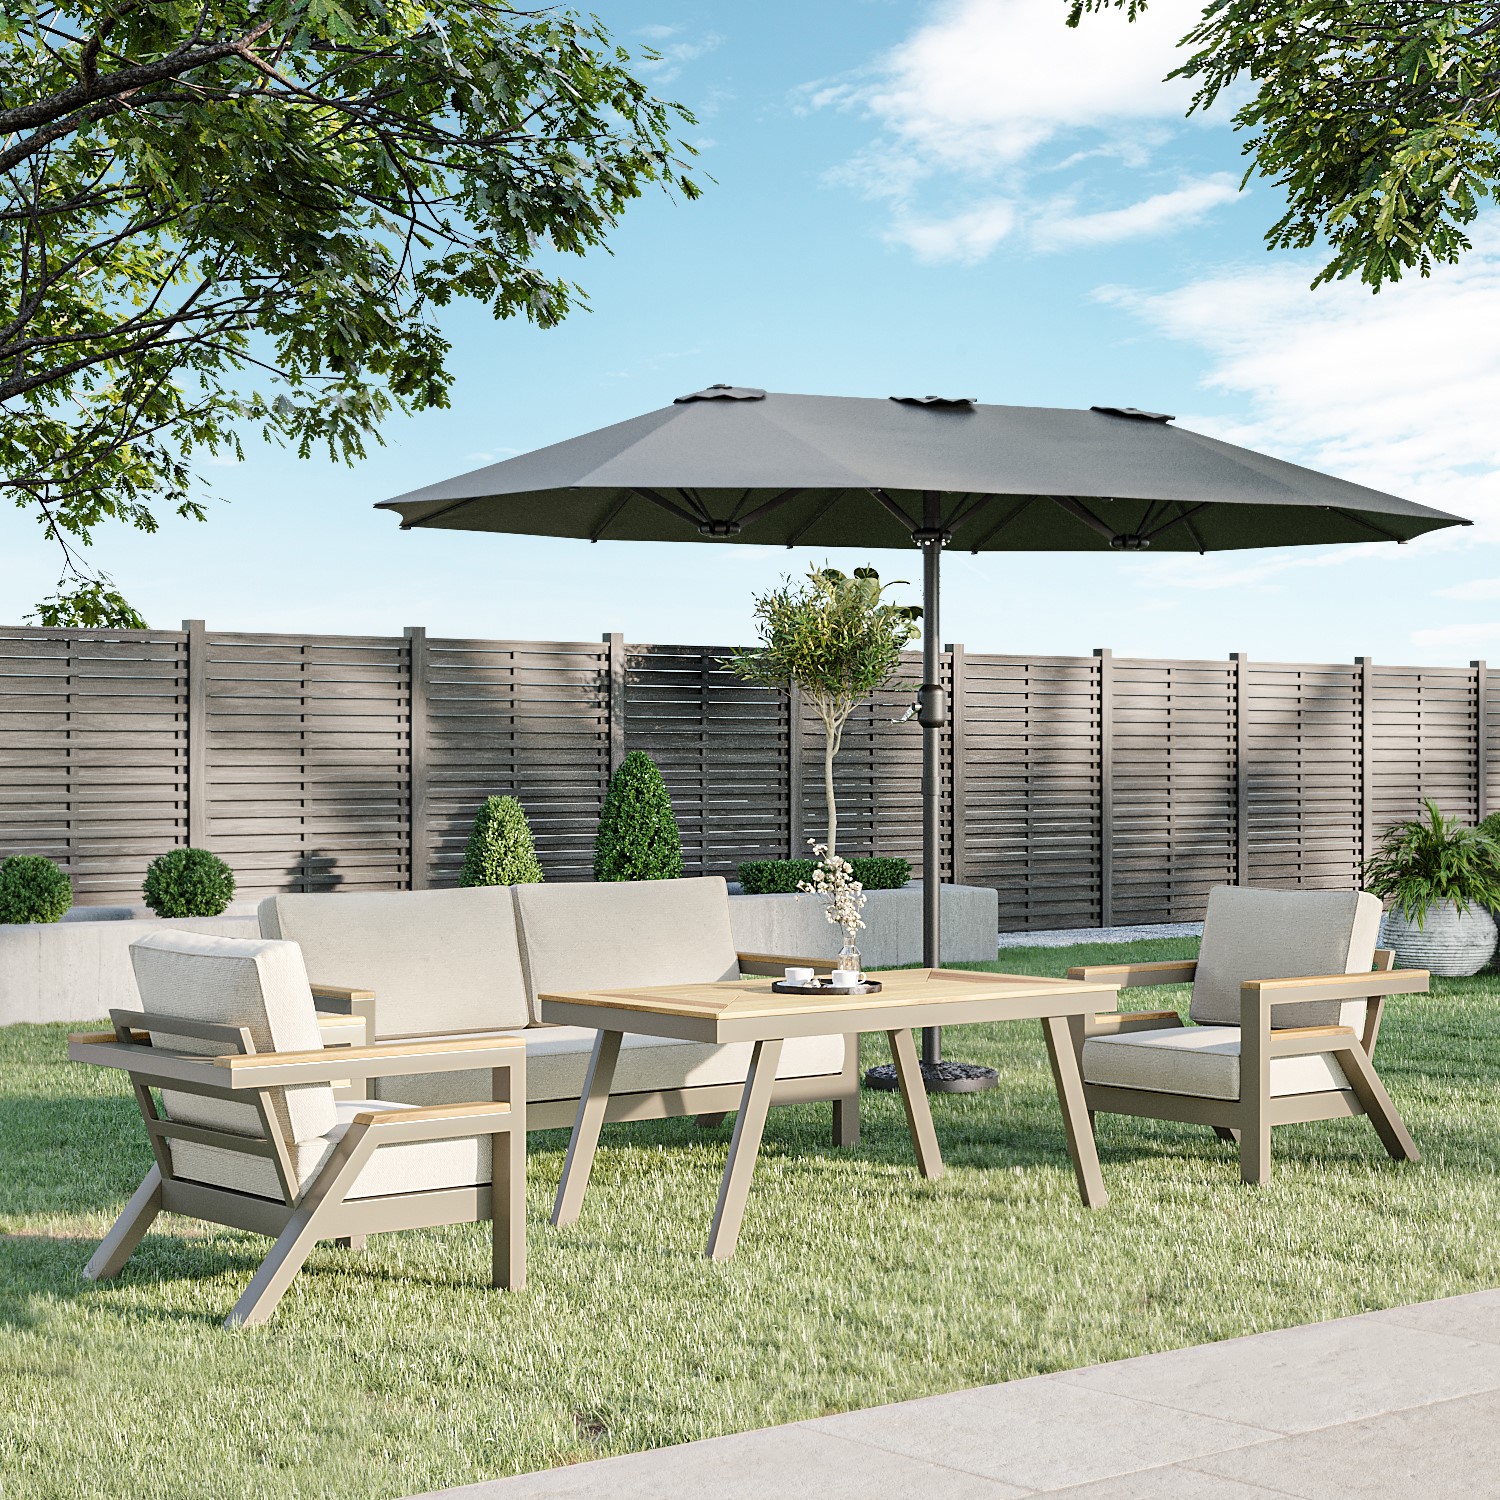 Read more about 2.7x4.5m large double sided grey parasol with base como